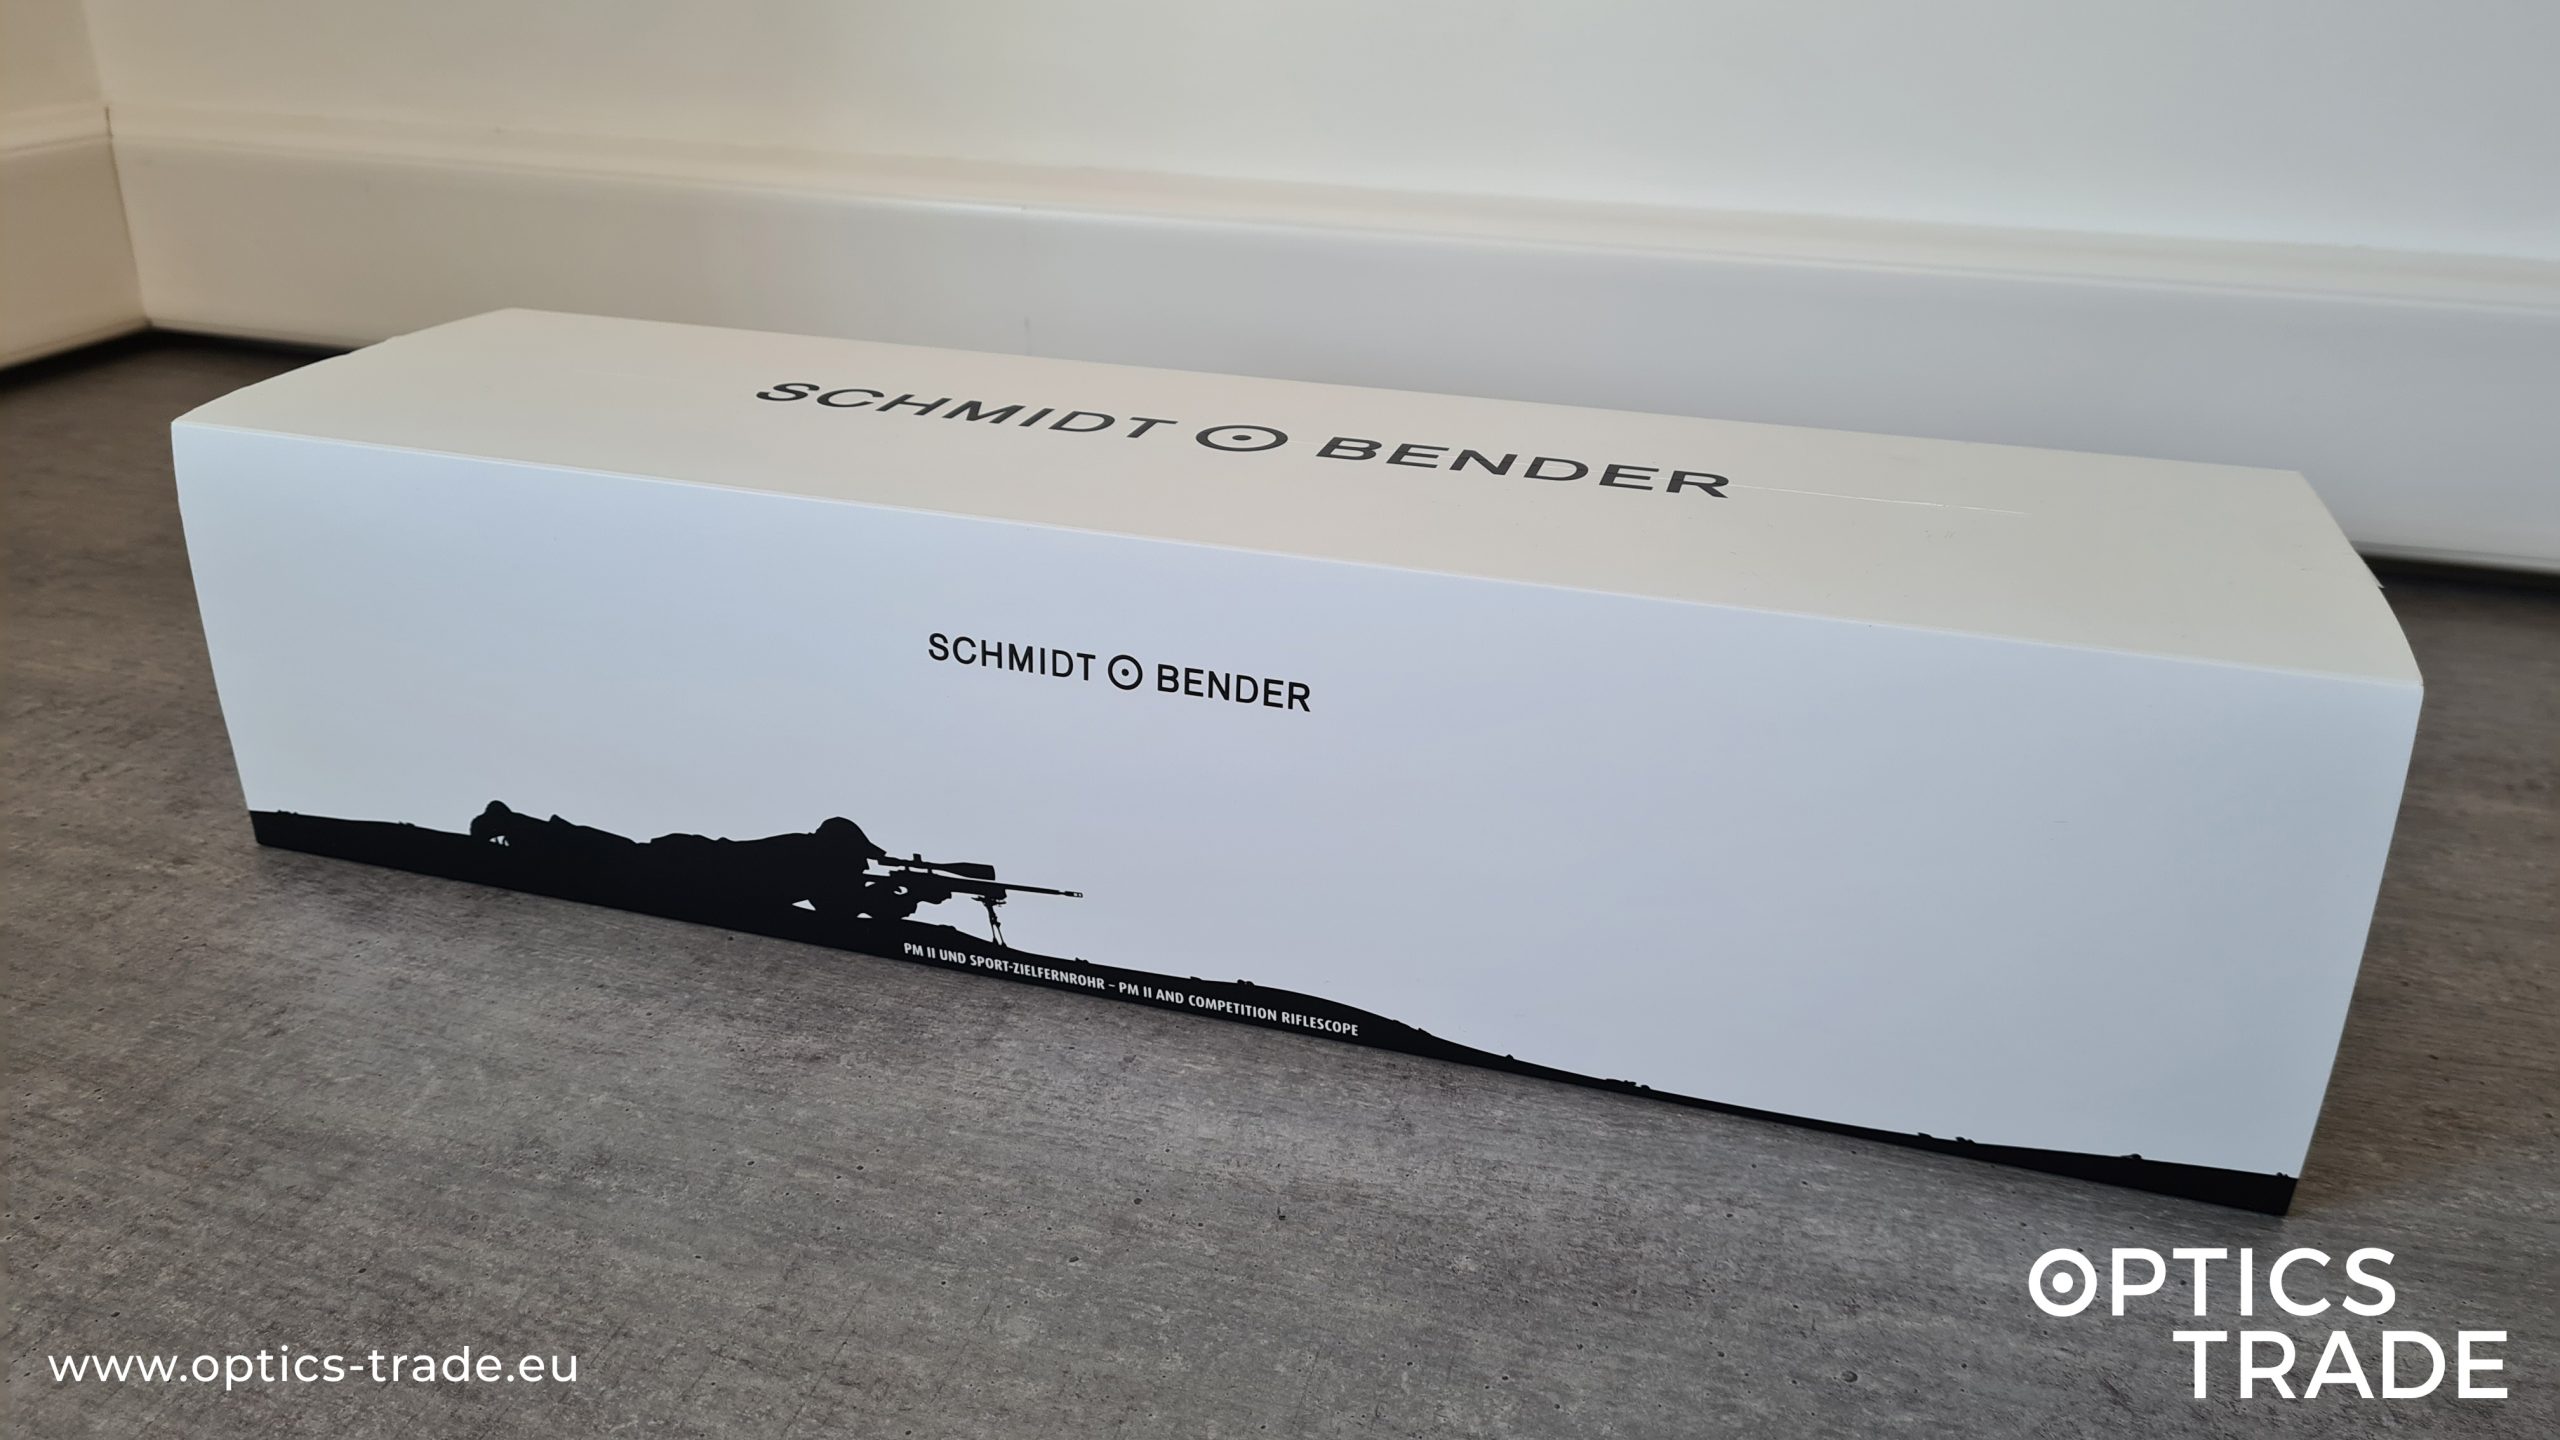 Schmidt & Bender's new Packaging (Outer layer)